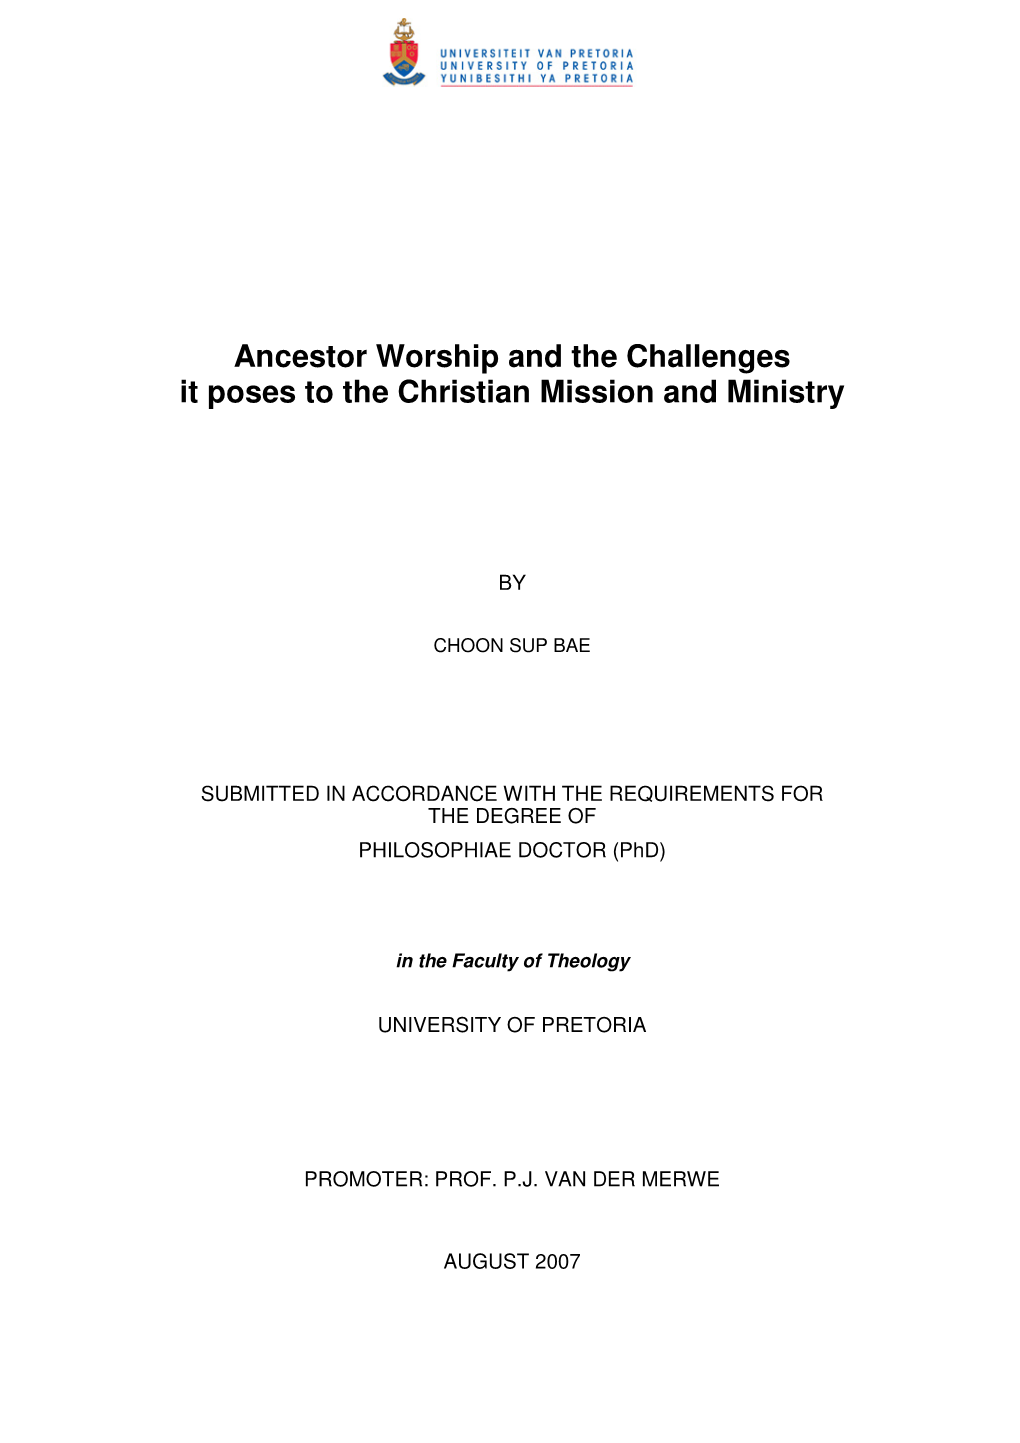 Ancestor Worship and the Challenges It Poses to the Christian Mission and Ministry